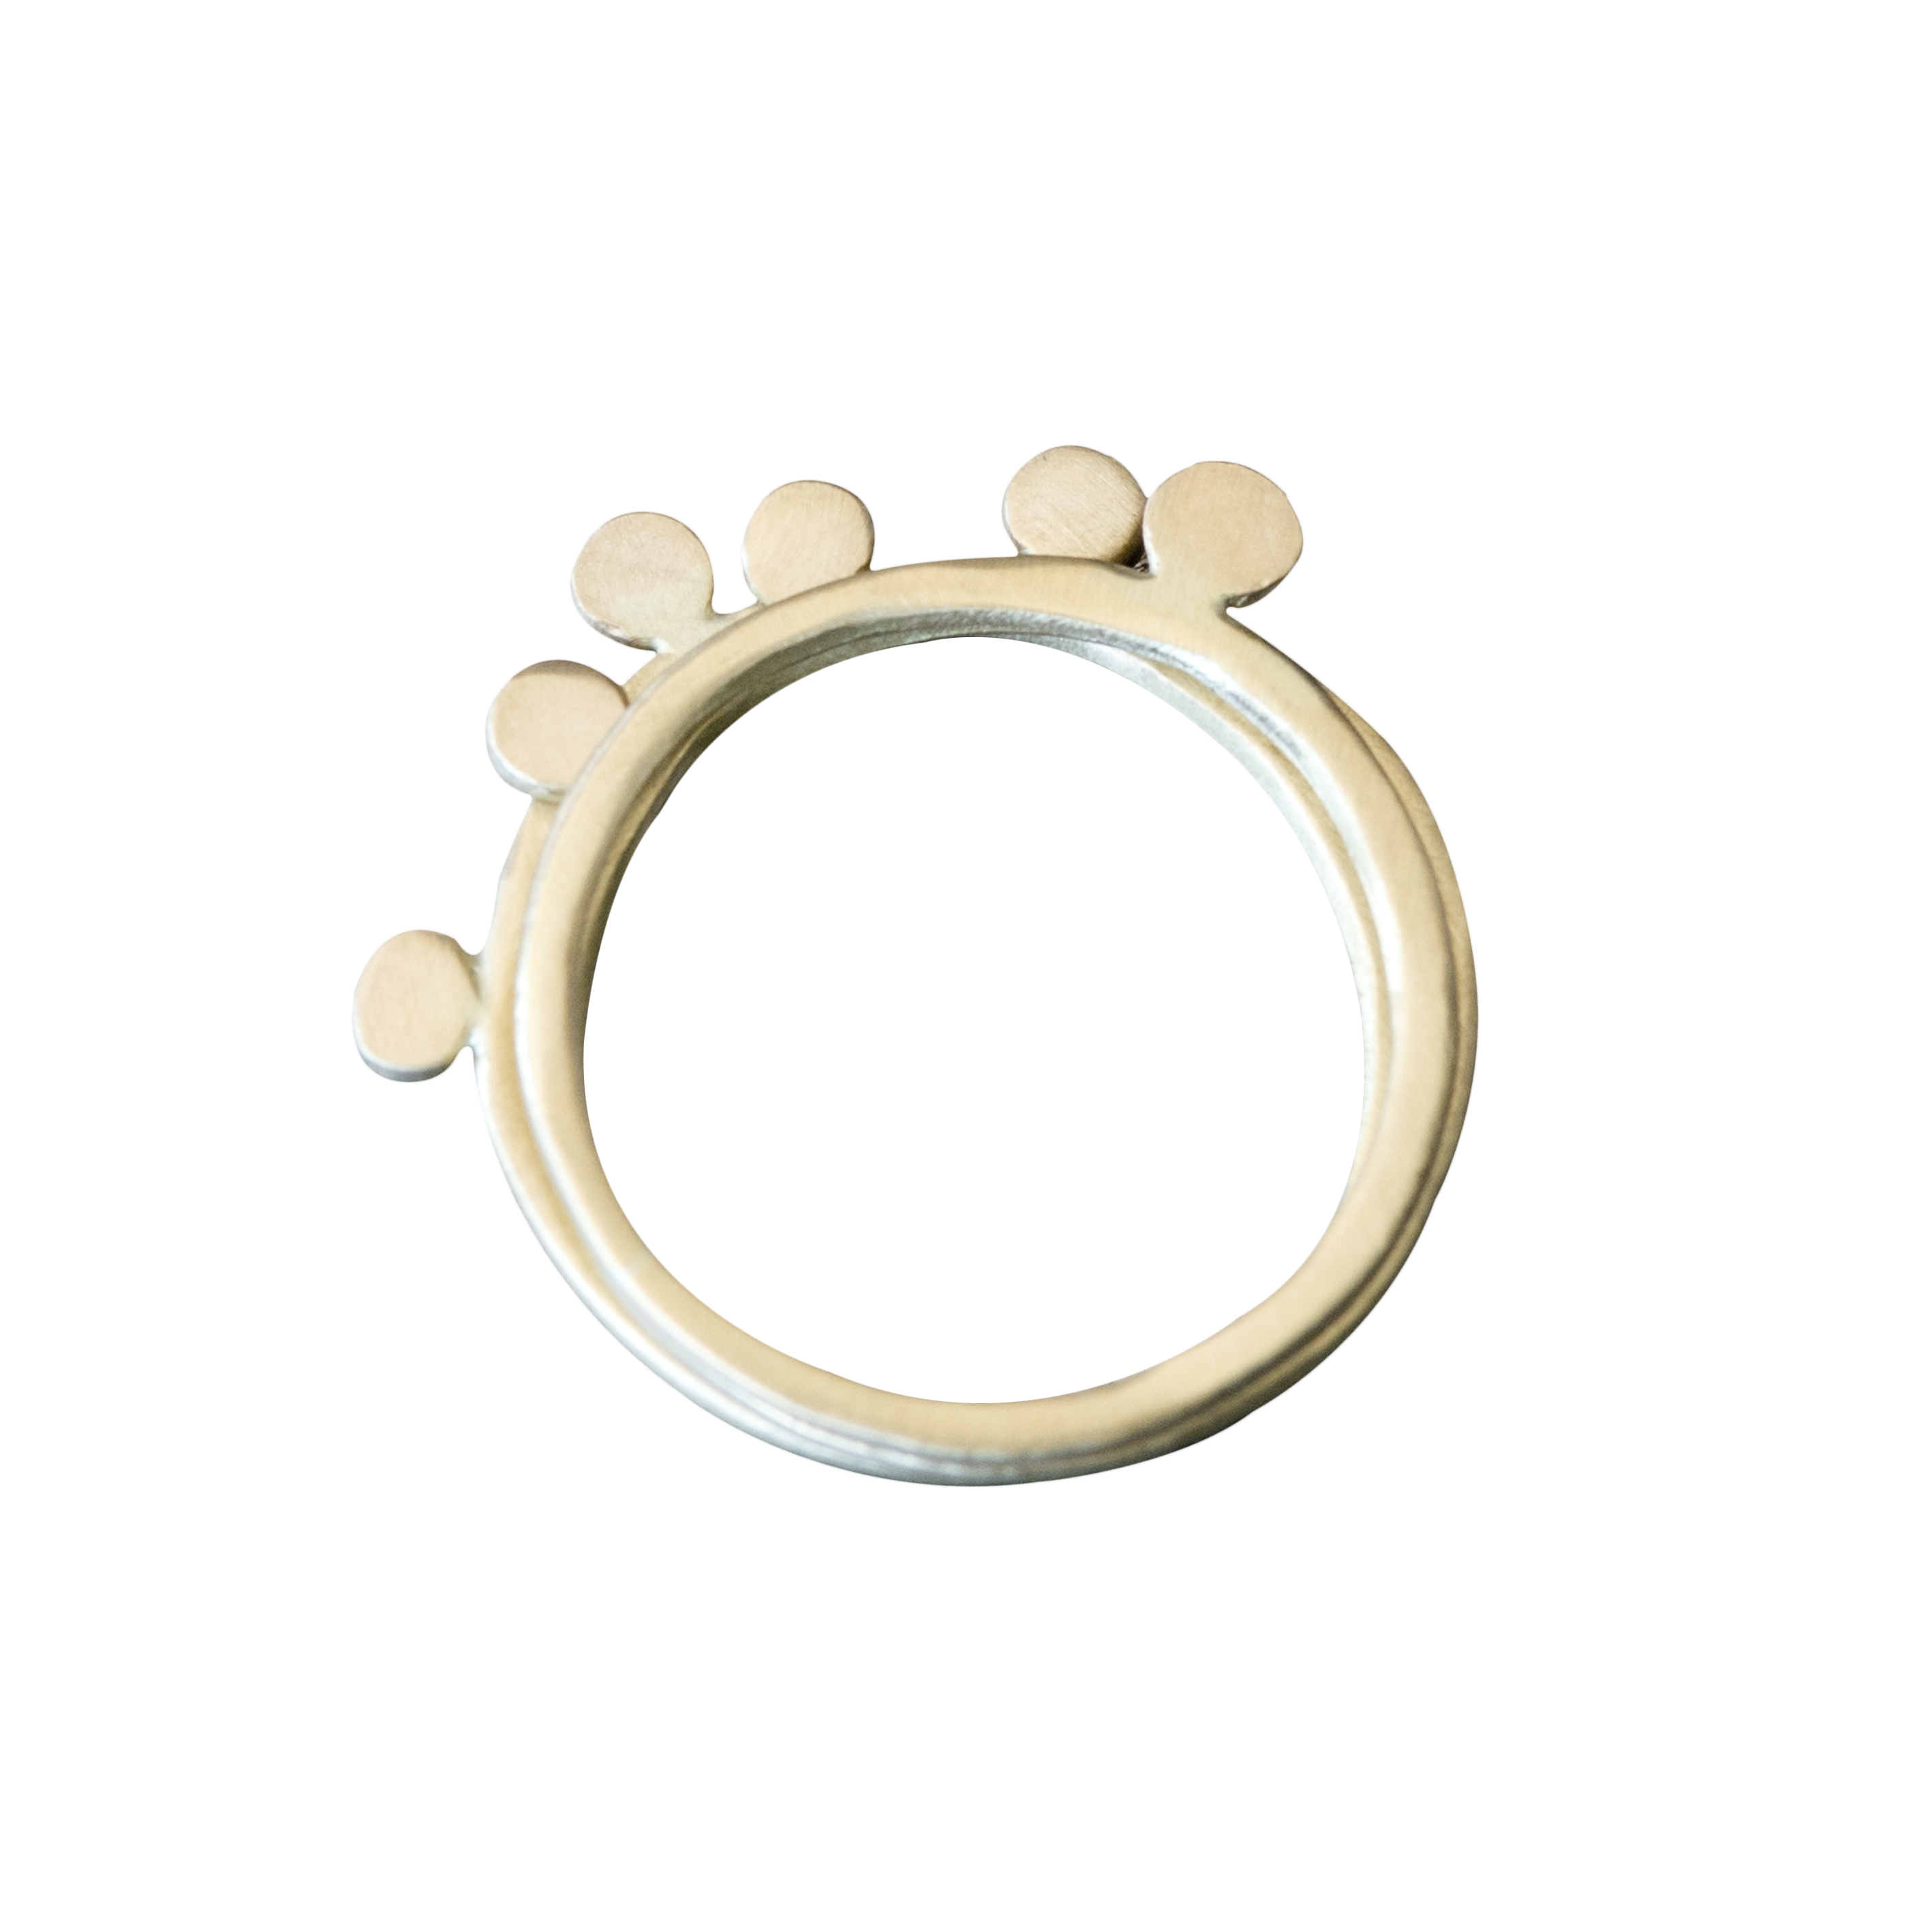 Blackbird Jewellery We Are One Light Set Of 3 18ct Gold Rings